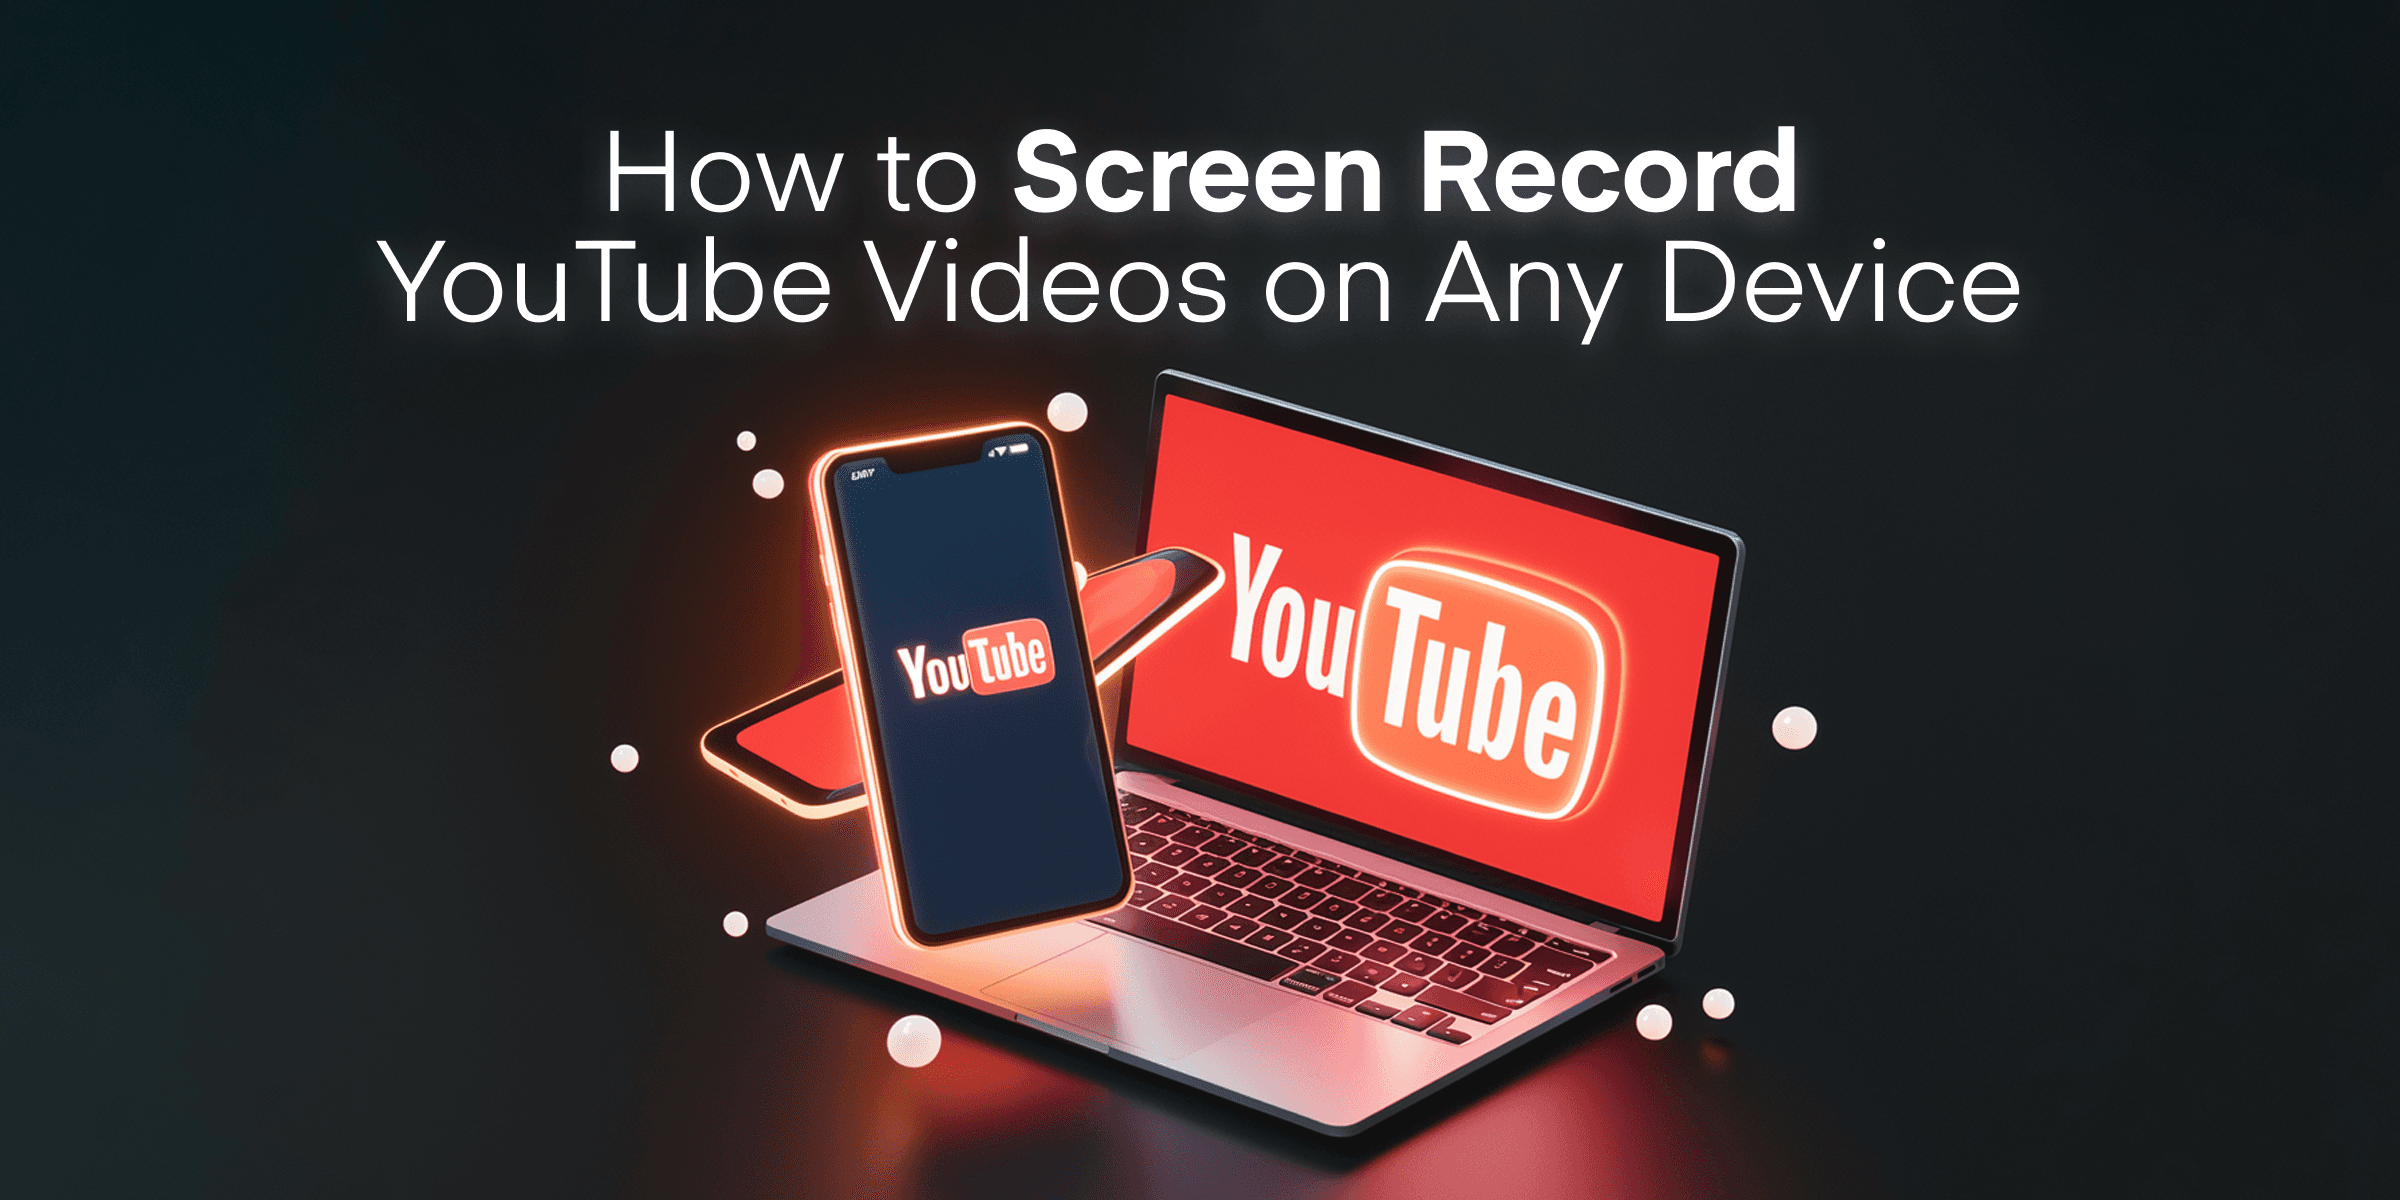 How to Screen Record YouTube Videos on Any Device